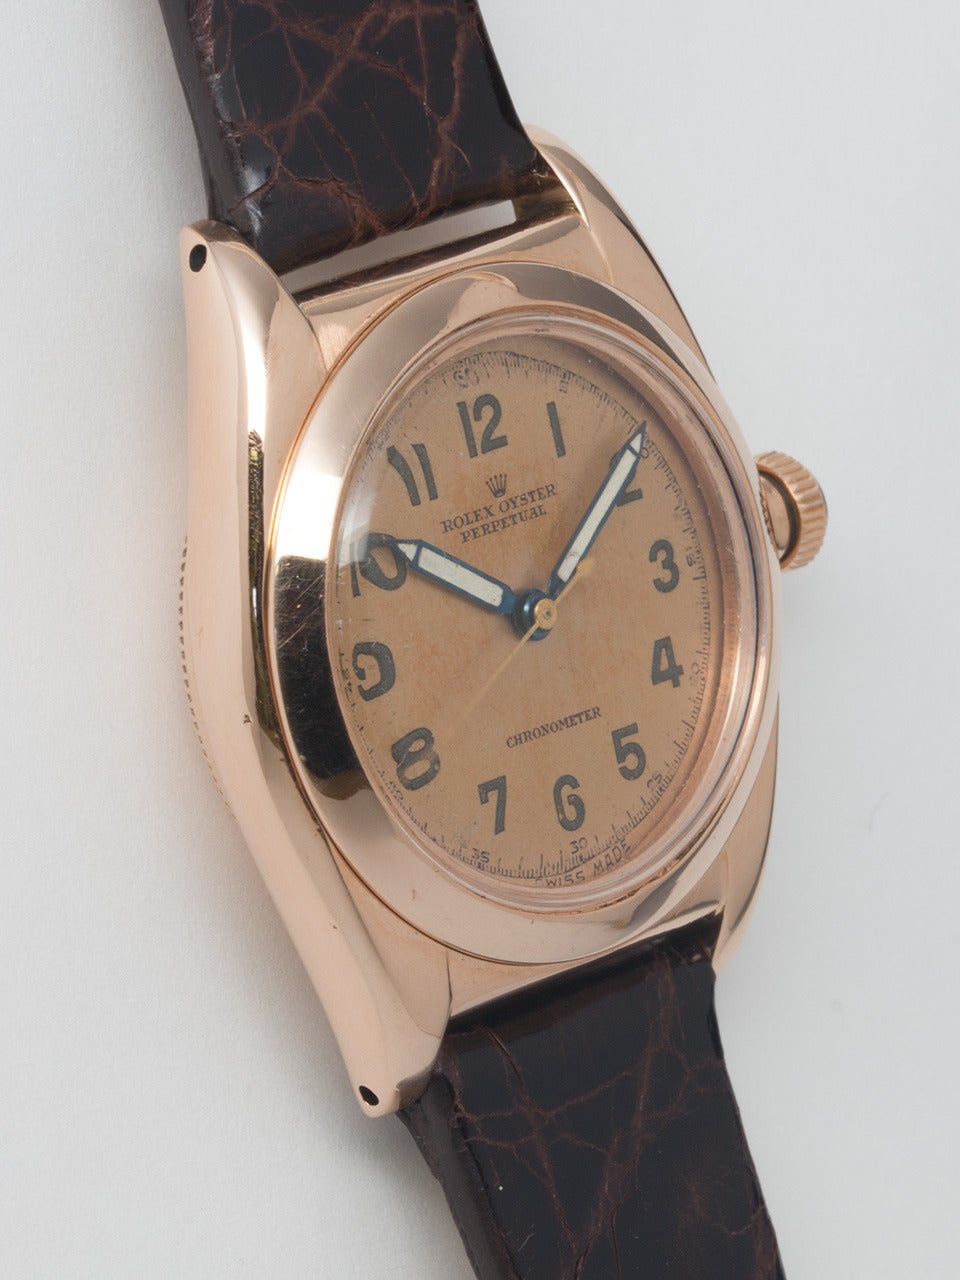 Rolex 14K Rose Gold Bubbleback Wristwatch, Ref. 3131 serial number 3.2 million, circa 1945. 32mm tonneau Oyster case and period rose gold bubble back crown. Original matte salmon dial with luminous indexes and hands. Powered by a self-winding